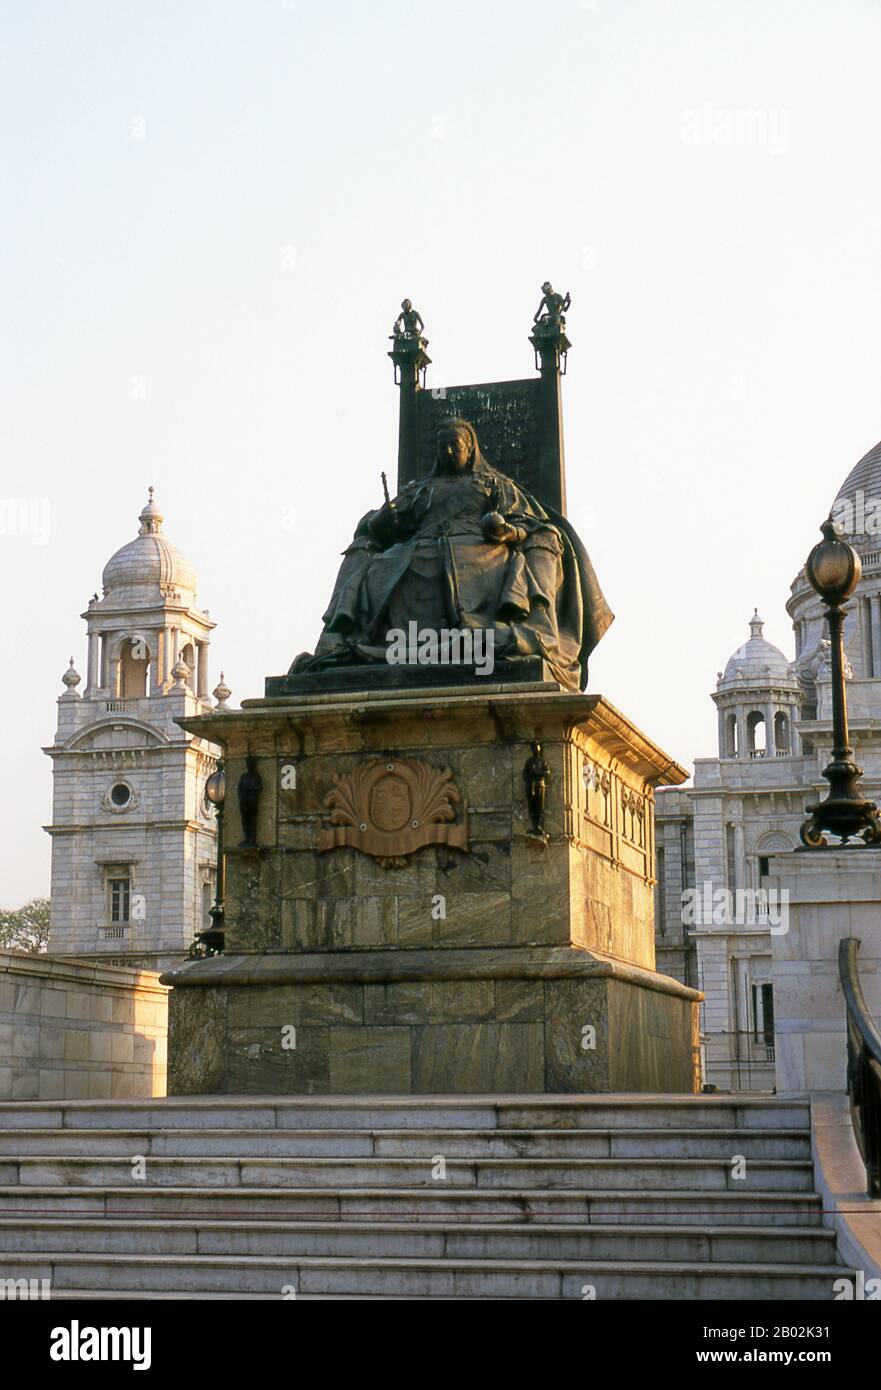 The Victoria Memorial Hall was built between 1906 and 1921 and is dedicated to the memory of Queen Victoria (1819–1901), Empress of India. The memorial was built in an Indo-Saracenic revivalist style and the architect was William Emerson (1843 - 1924).  The tax records of Mughal Emperor Akbar (1584–1598) as well as the work of a 15th century Bengali poet, Bipradaas, both mention a settlement named Kalikata (thought to mean ‘Steps of Kali’ for the Hindu goddess Kali) from which the name Calcutta is believed to derive.  In 1690 Job Charnock, an agent of the East India Company, founded the first Stock Photo